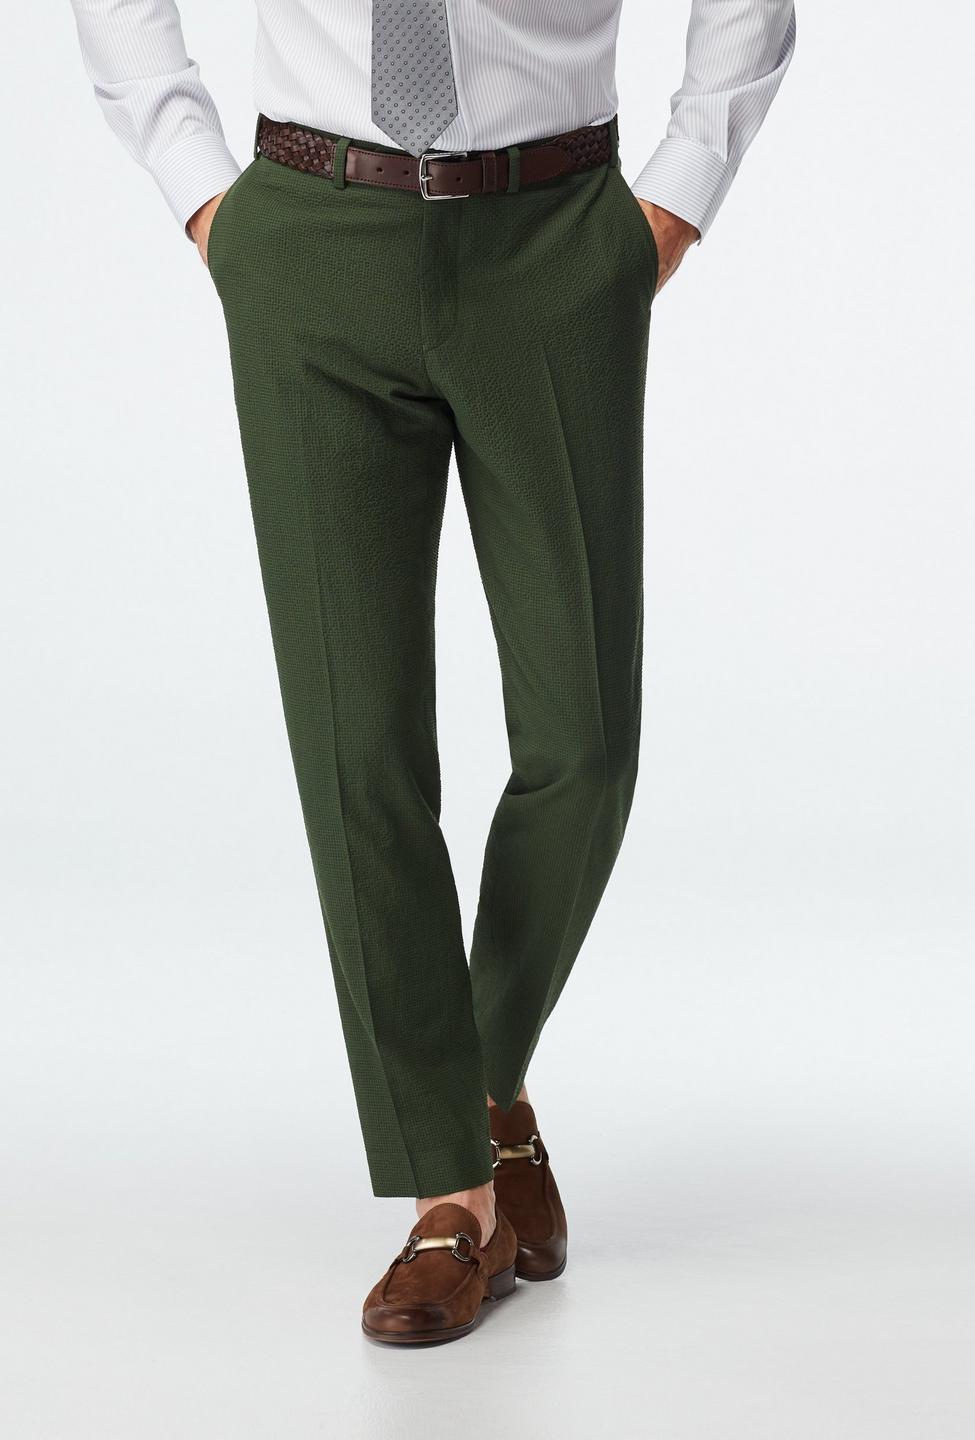 Green pants - Stapleford Solid Design from Seasonal Indochino Collection